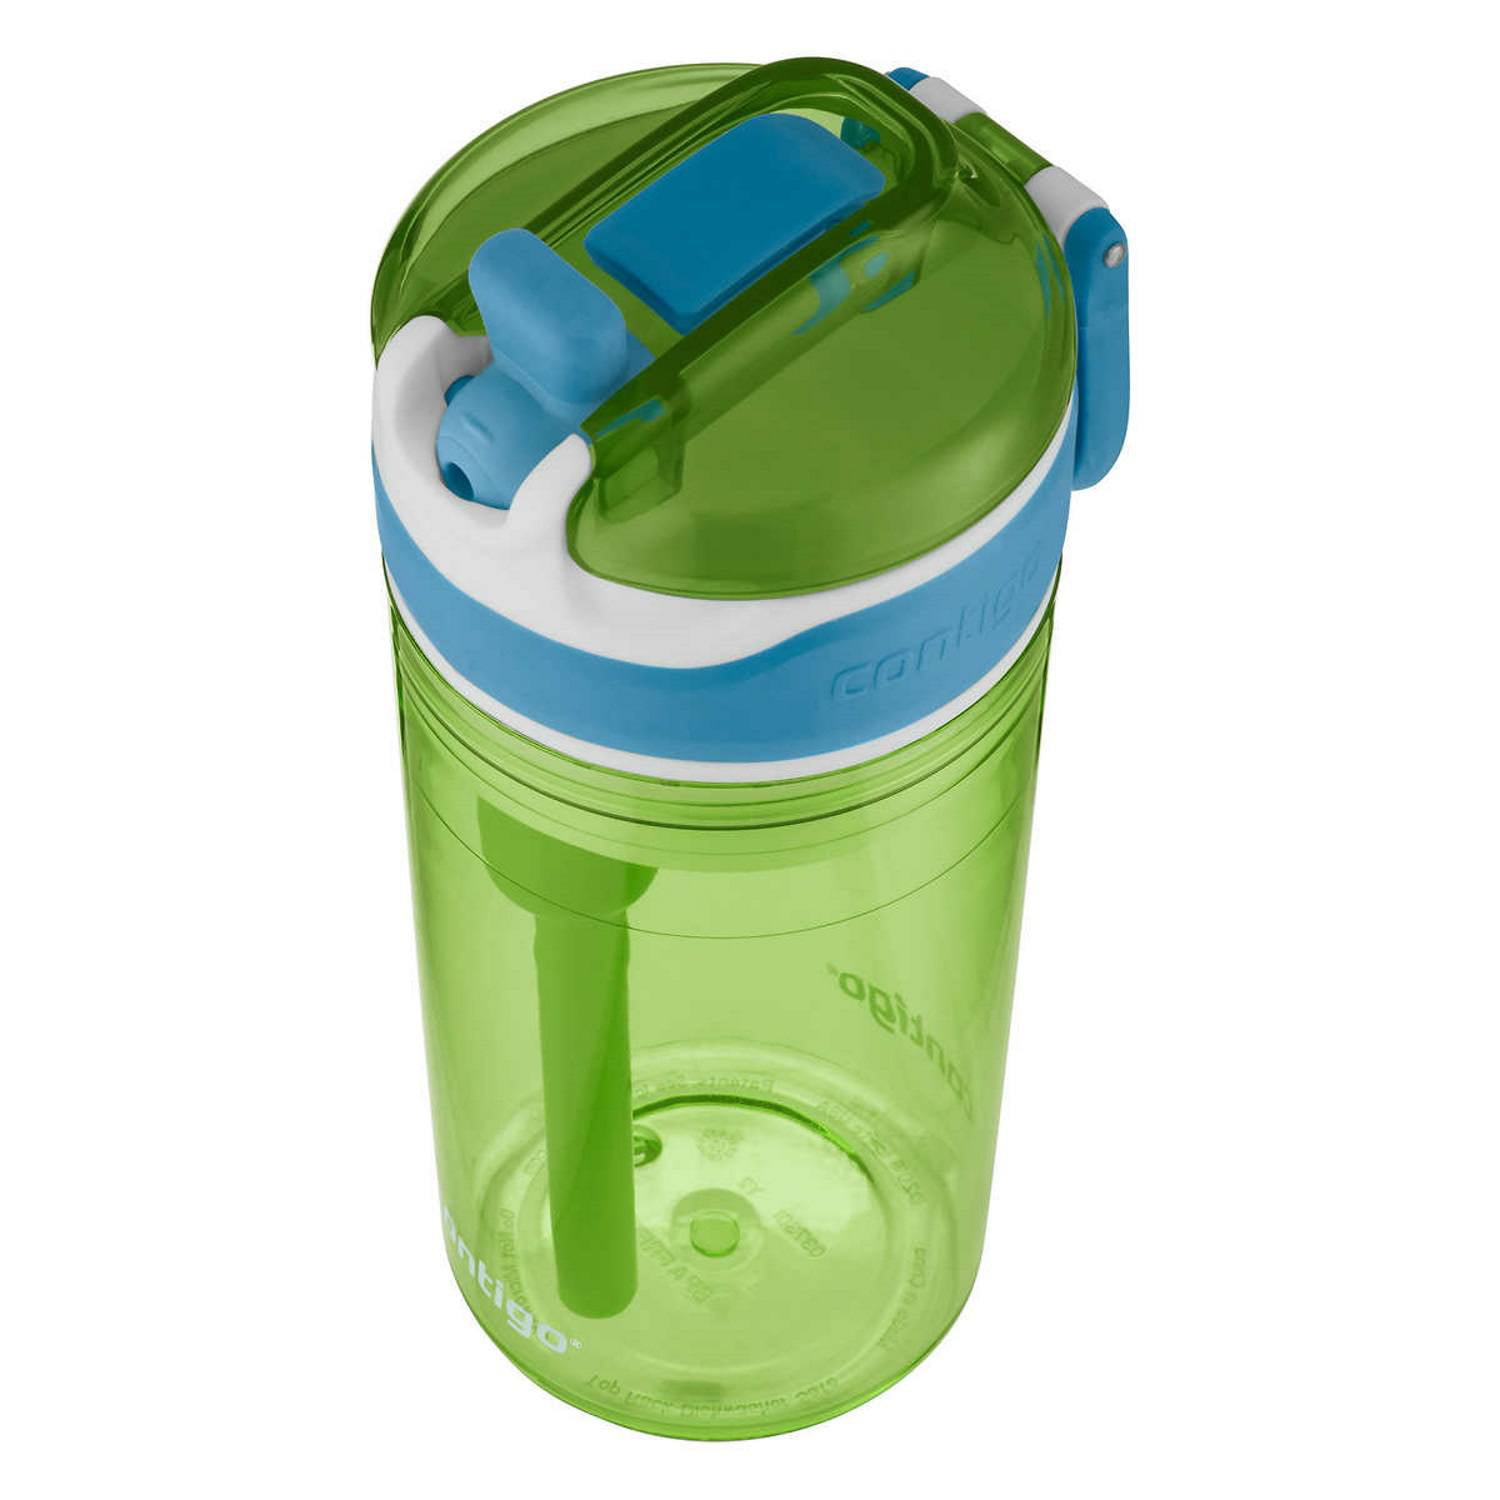 Contigo Kids 2 and 1 Snack Hero Kids Tumbler and Snack Cup- 13 oz - 2 pack  - (Purple-Green)